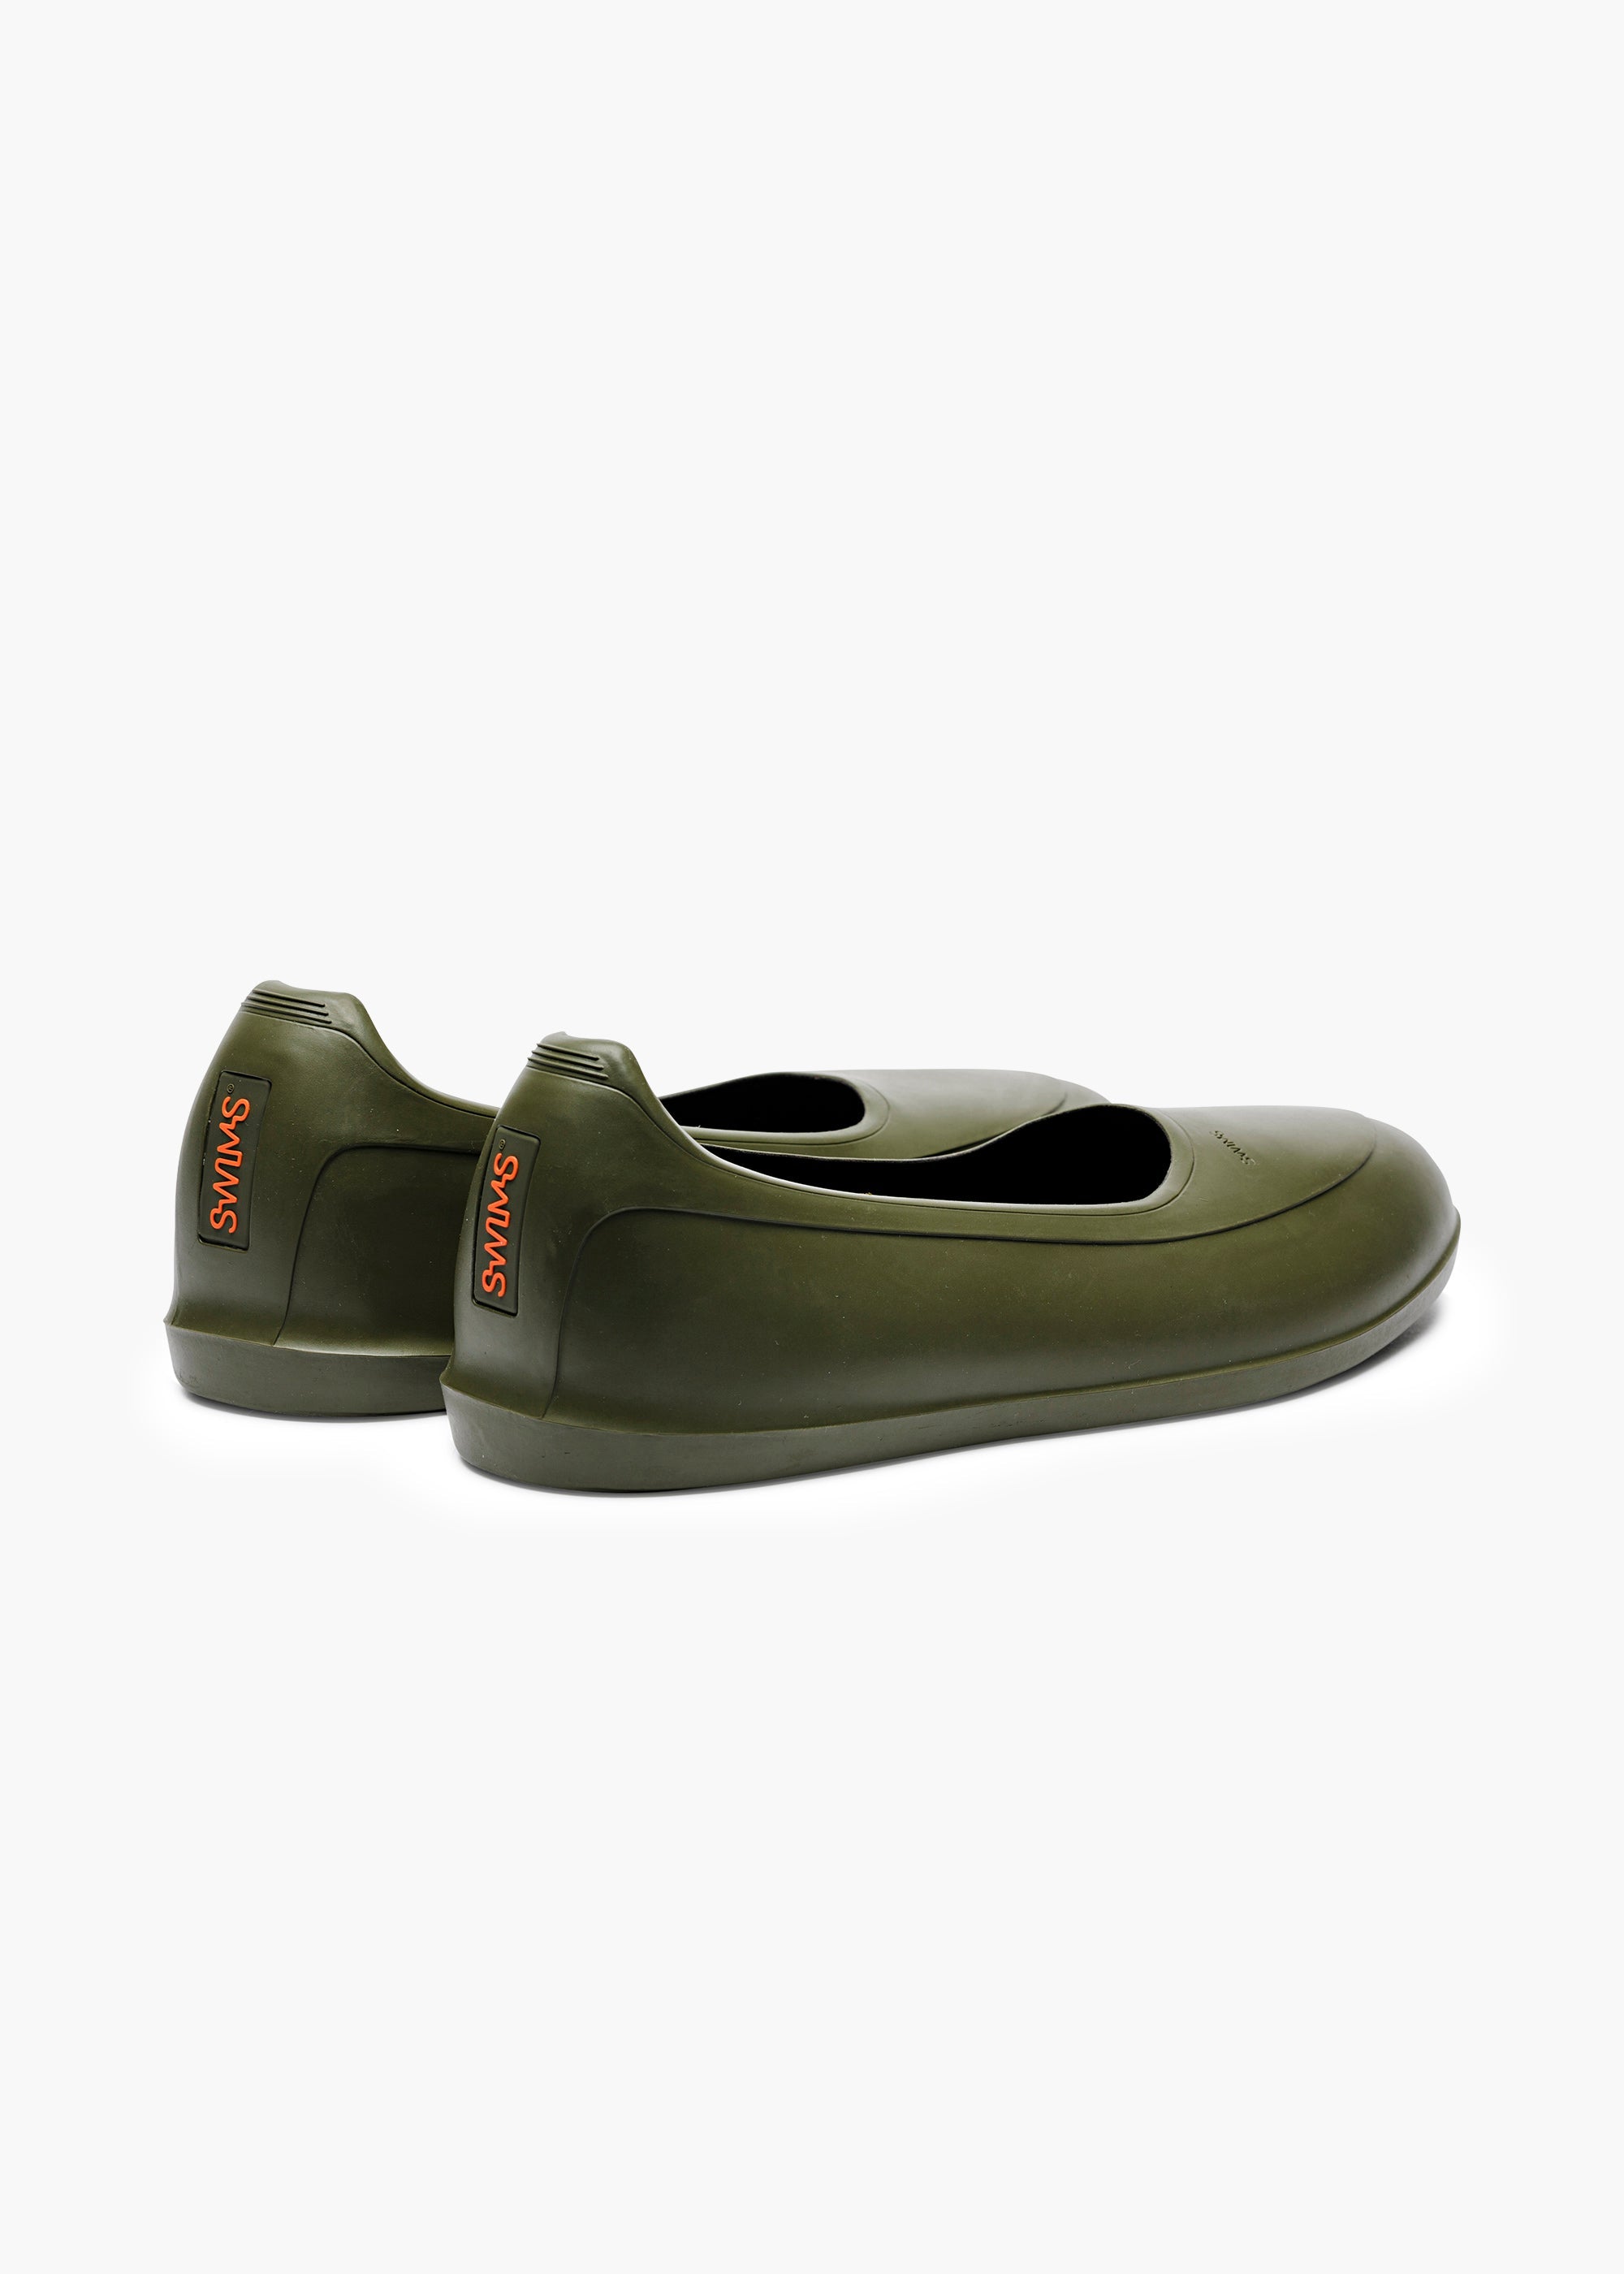 Swims Classic Seamless Galoshes, Shoe Care & Laces